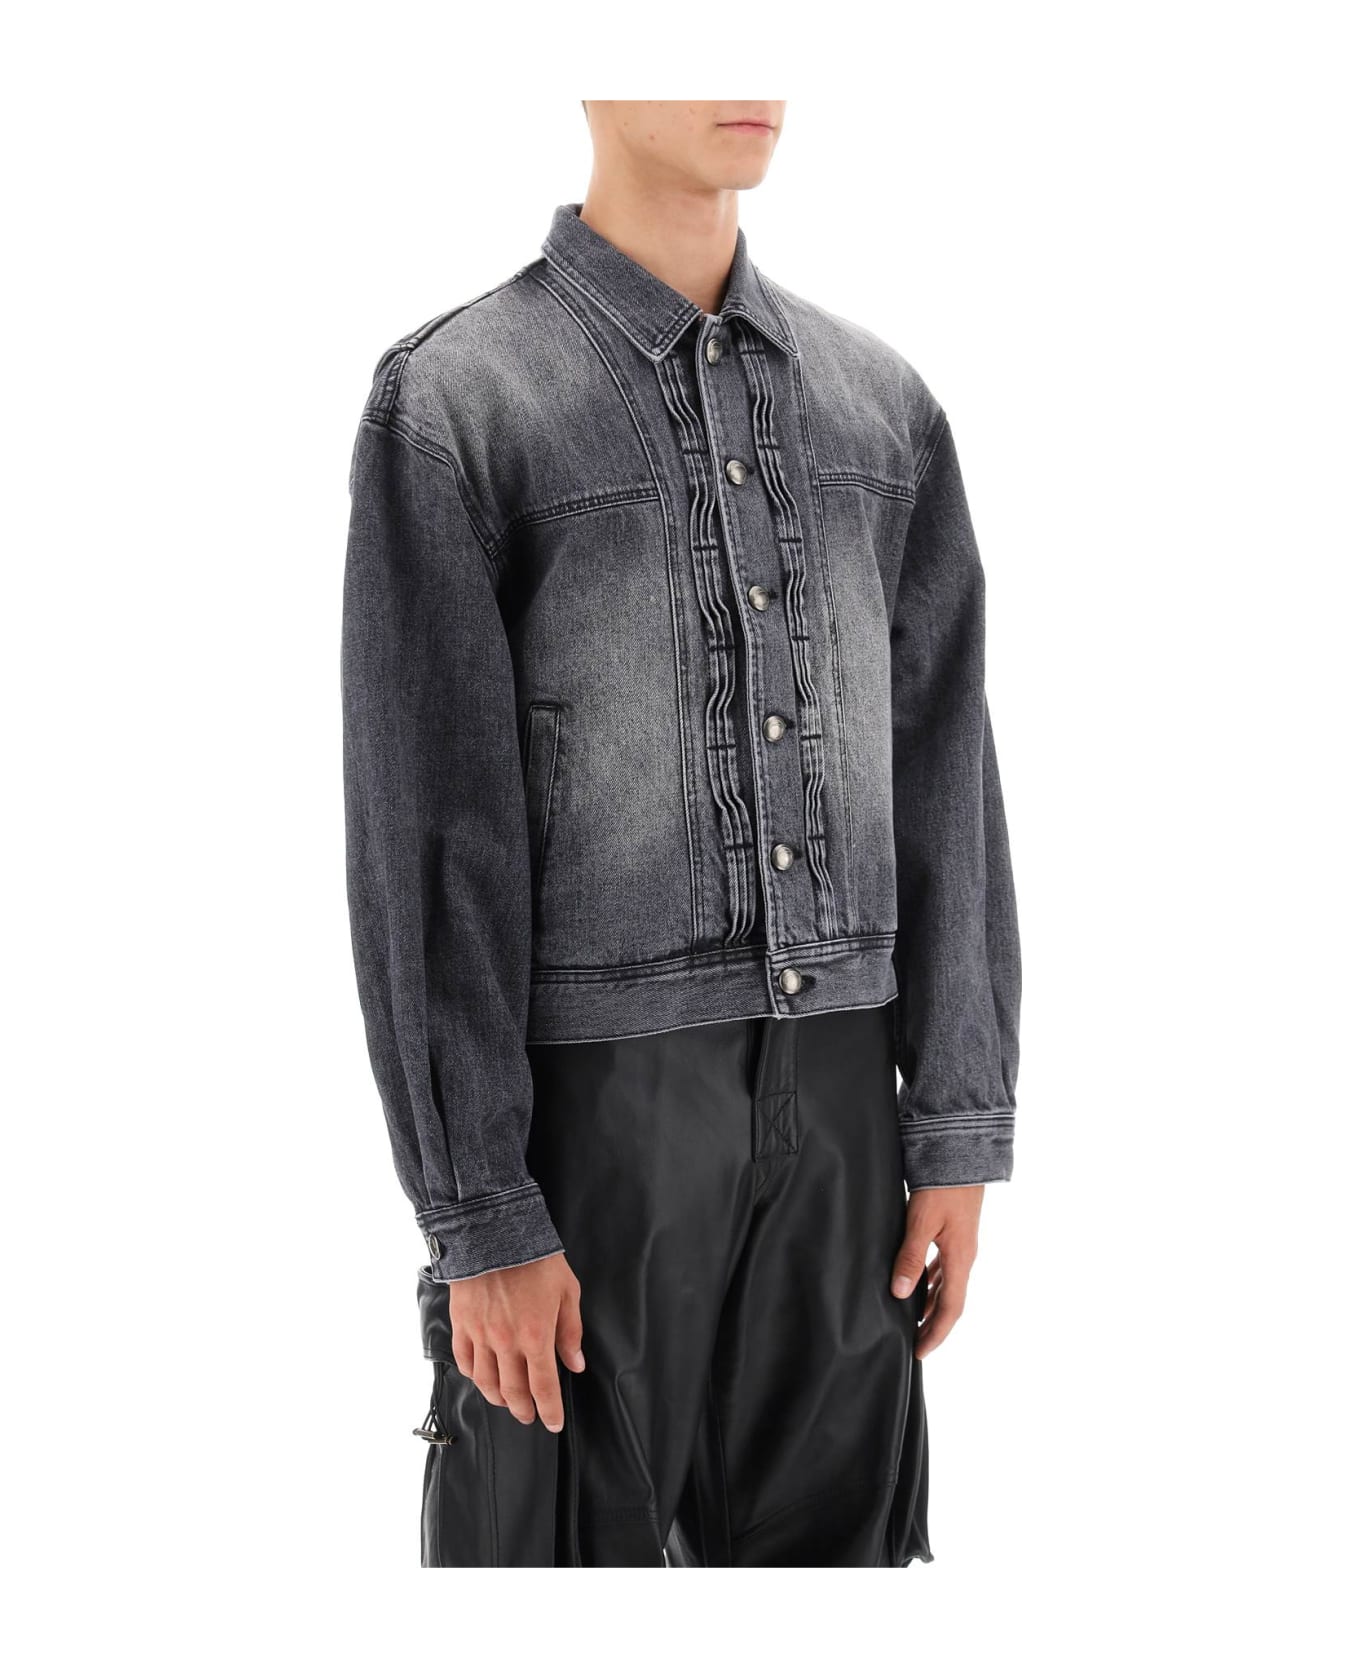 Andersson Bell Denim Jacket With Wavy Details - WASHED BLACK (Grey)